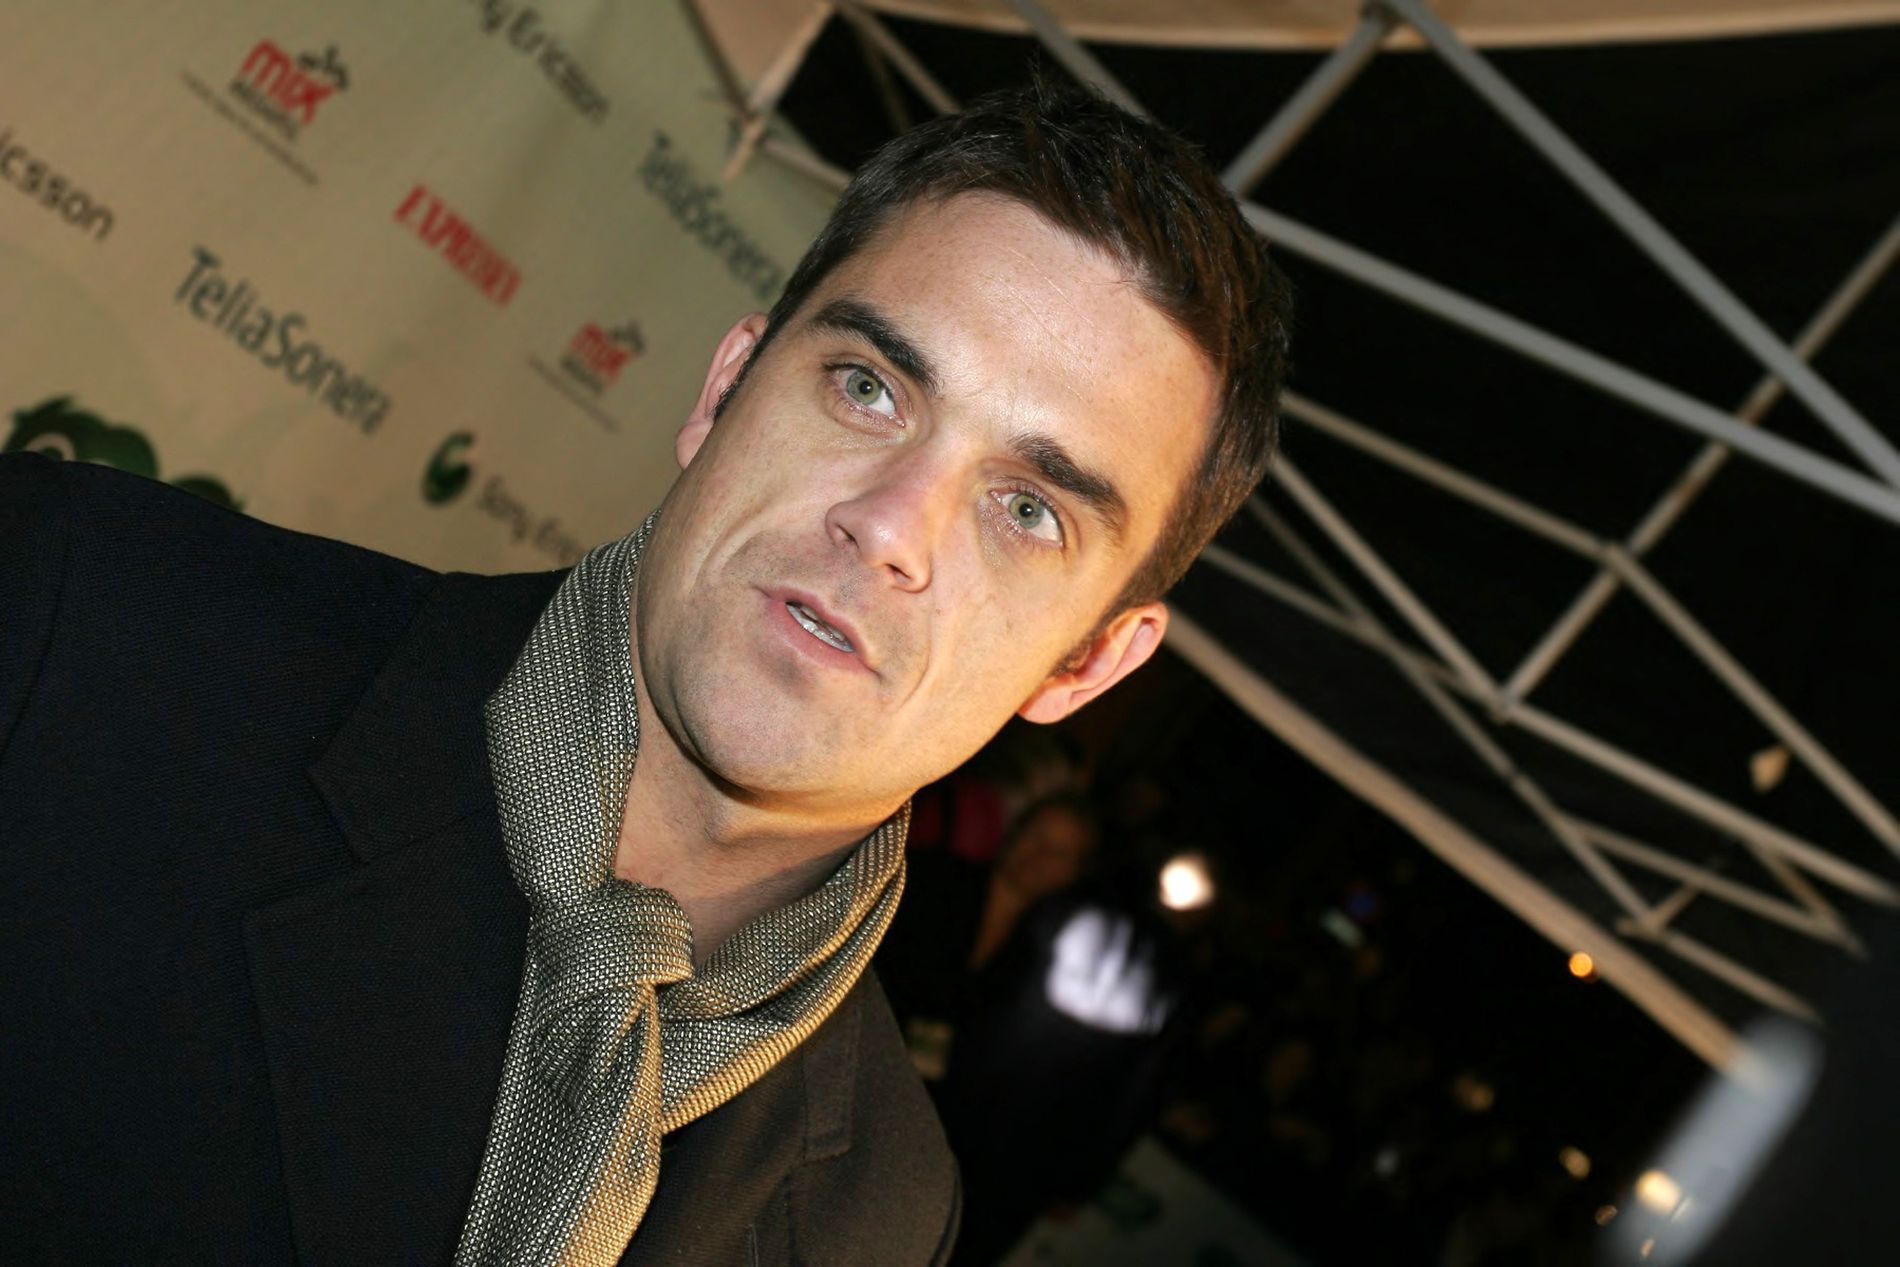 Robbie Williams (photo) makes life miserable for the neighbor in London, the legendary guitarist of Led Zeppelin, Jimmy Page. Here from a visit to Oslo in 2004. 